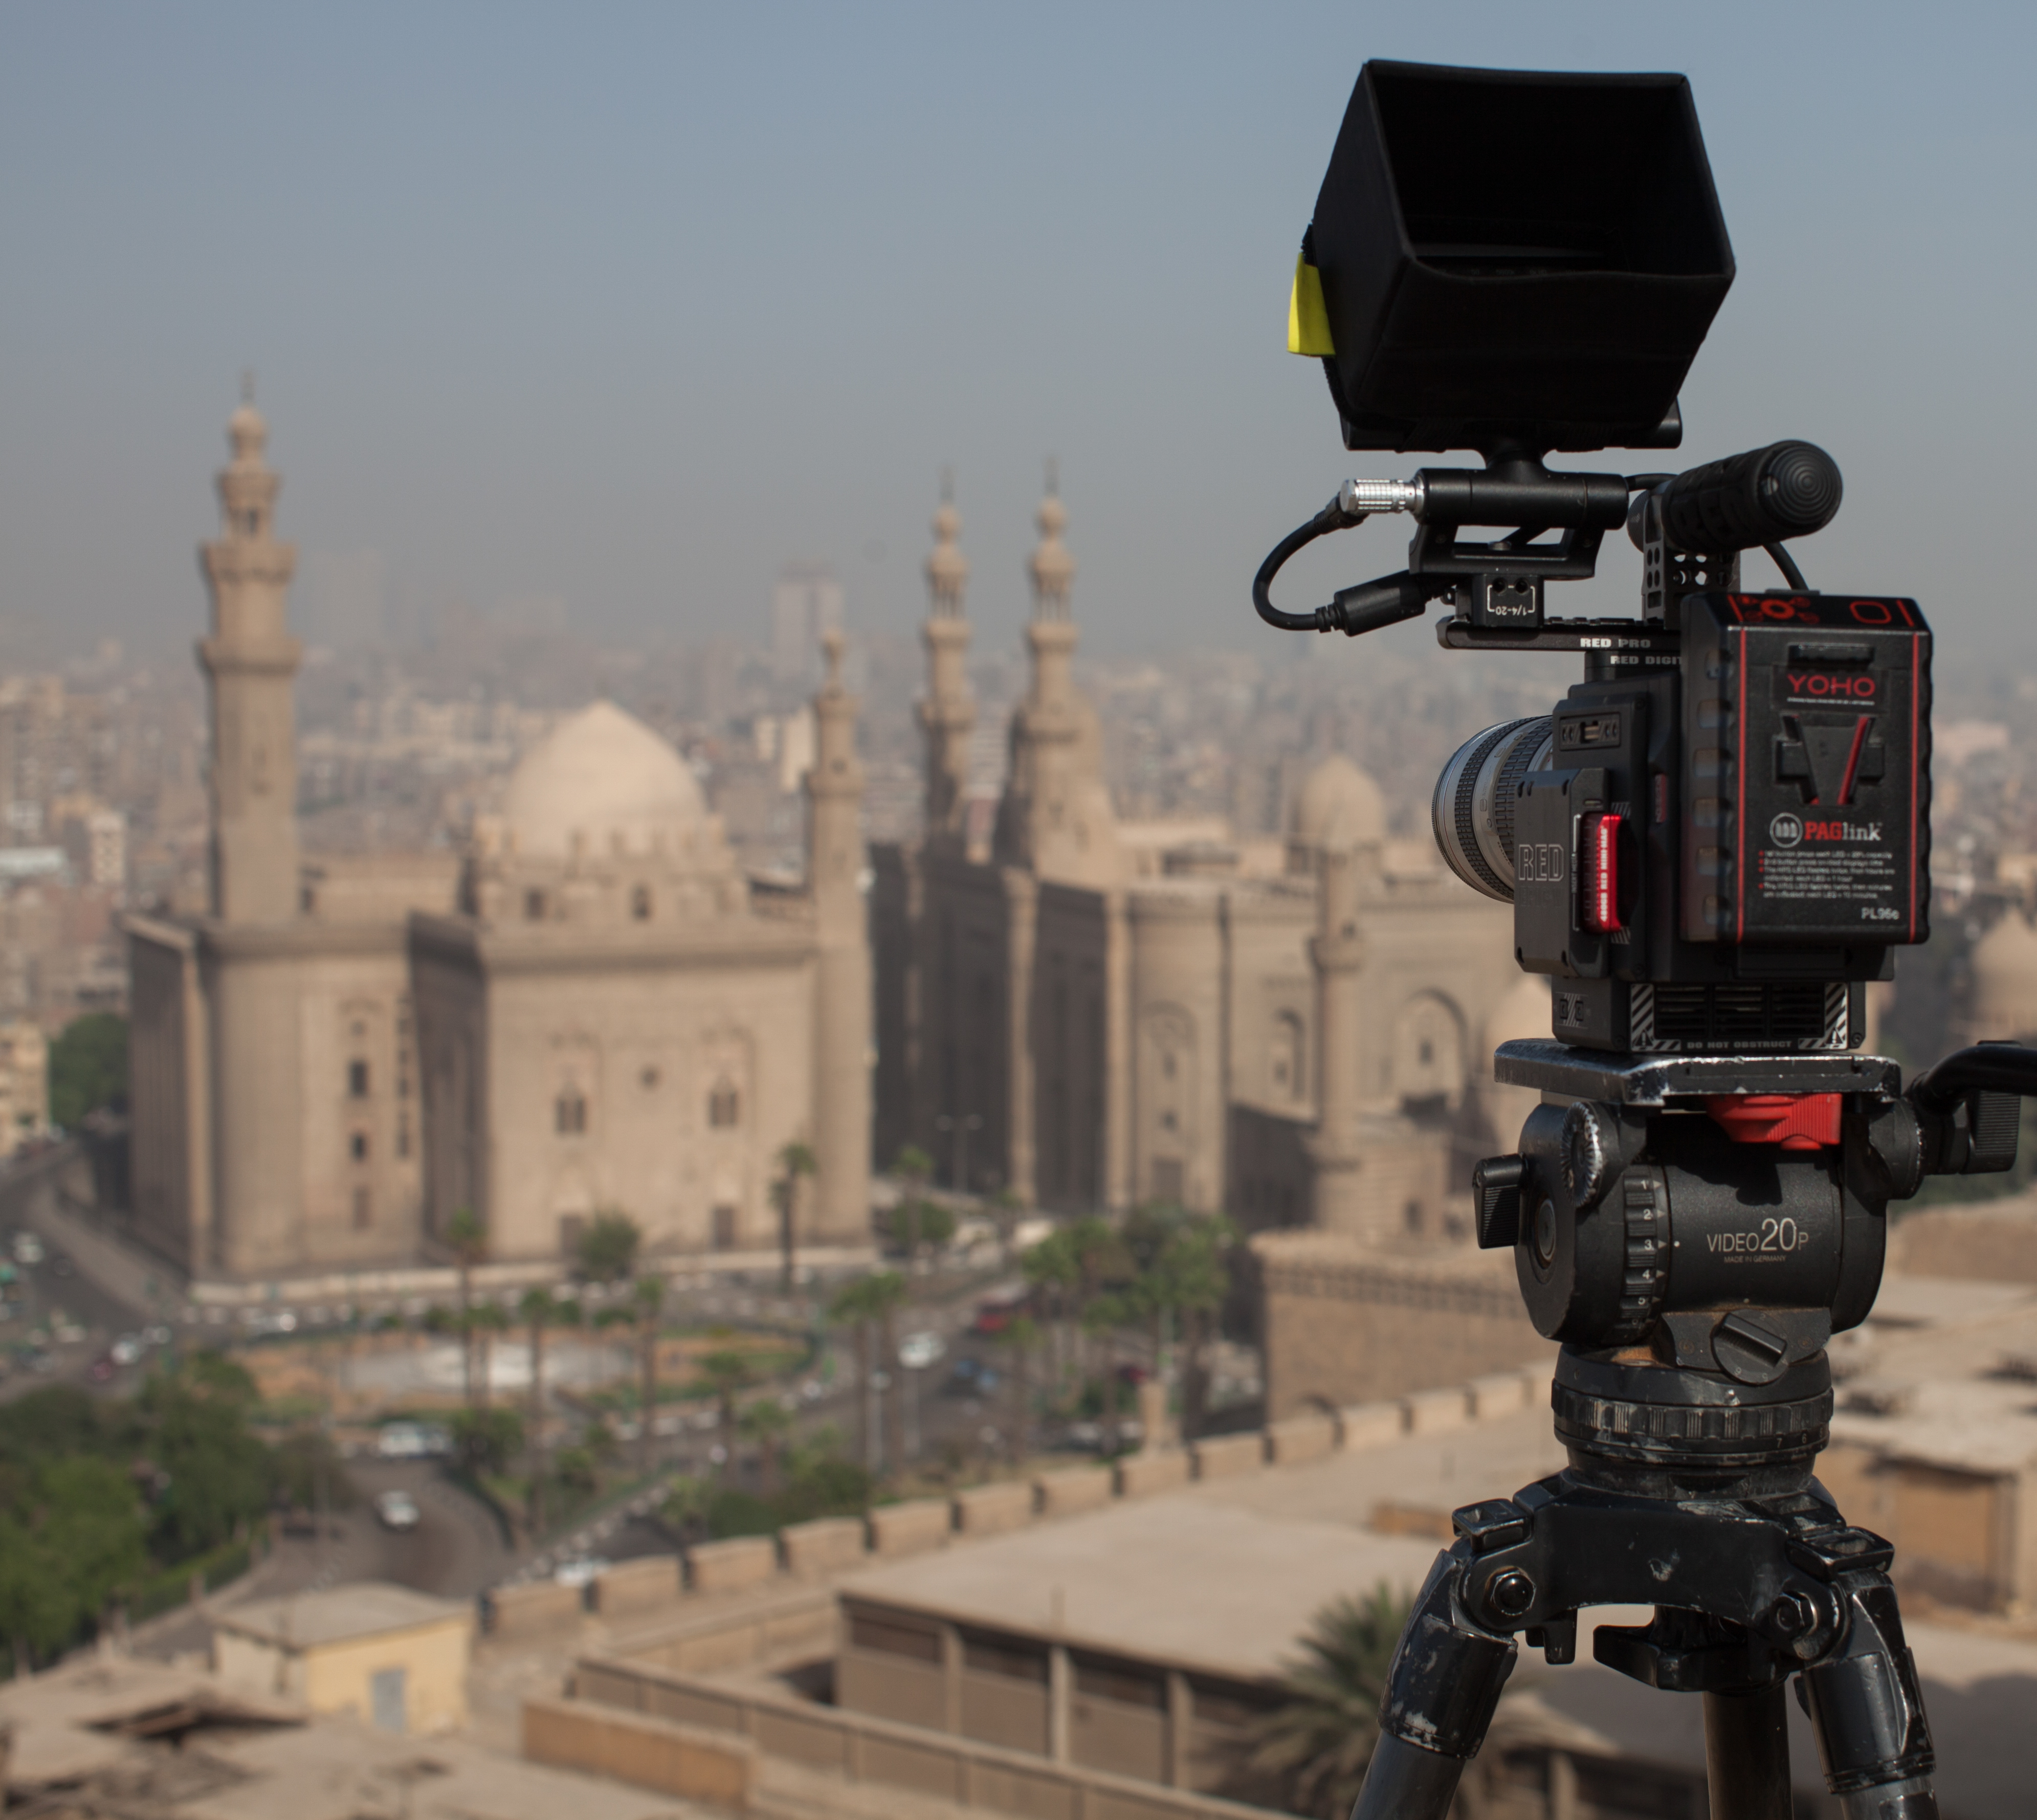 Location filming in Cairo